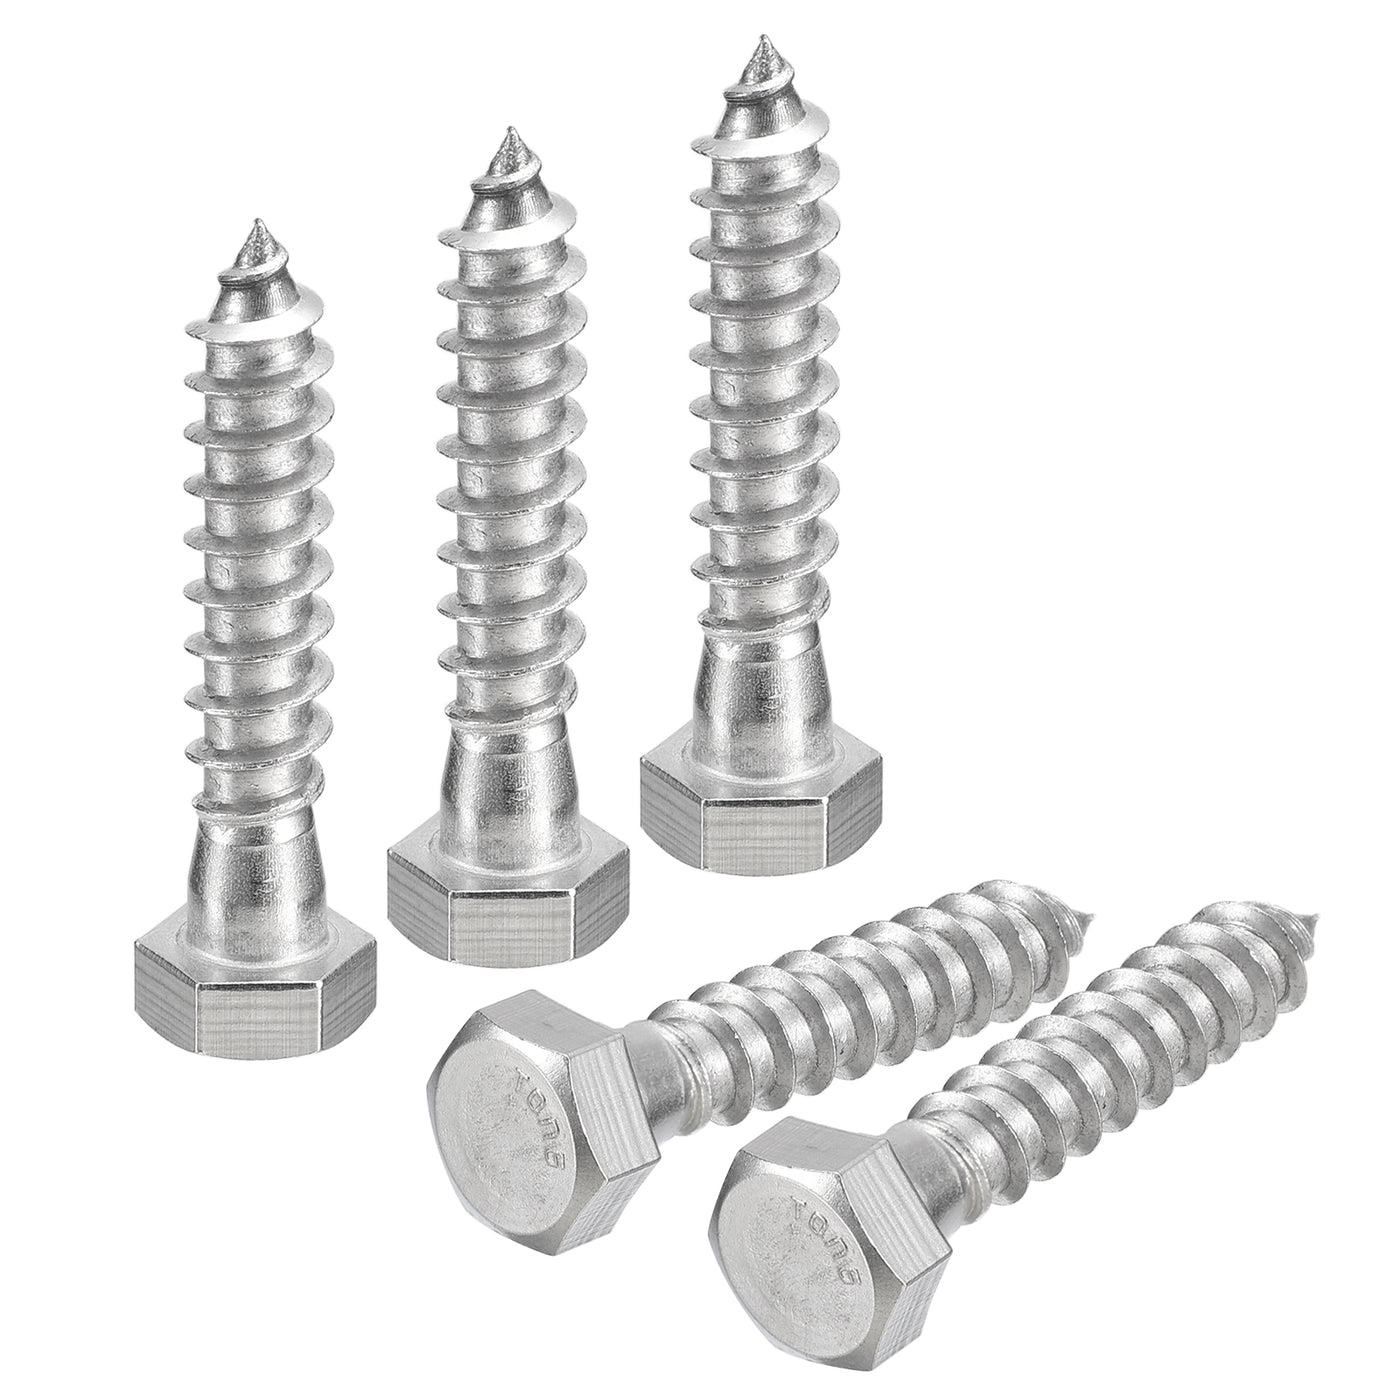 uxcell Uxcell Hex Head Lag Screws Bolts, 20pcs 3/8" x 2" 304 Stainless Steel Wood Screws